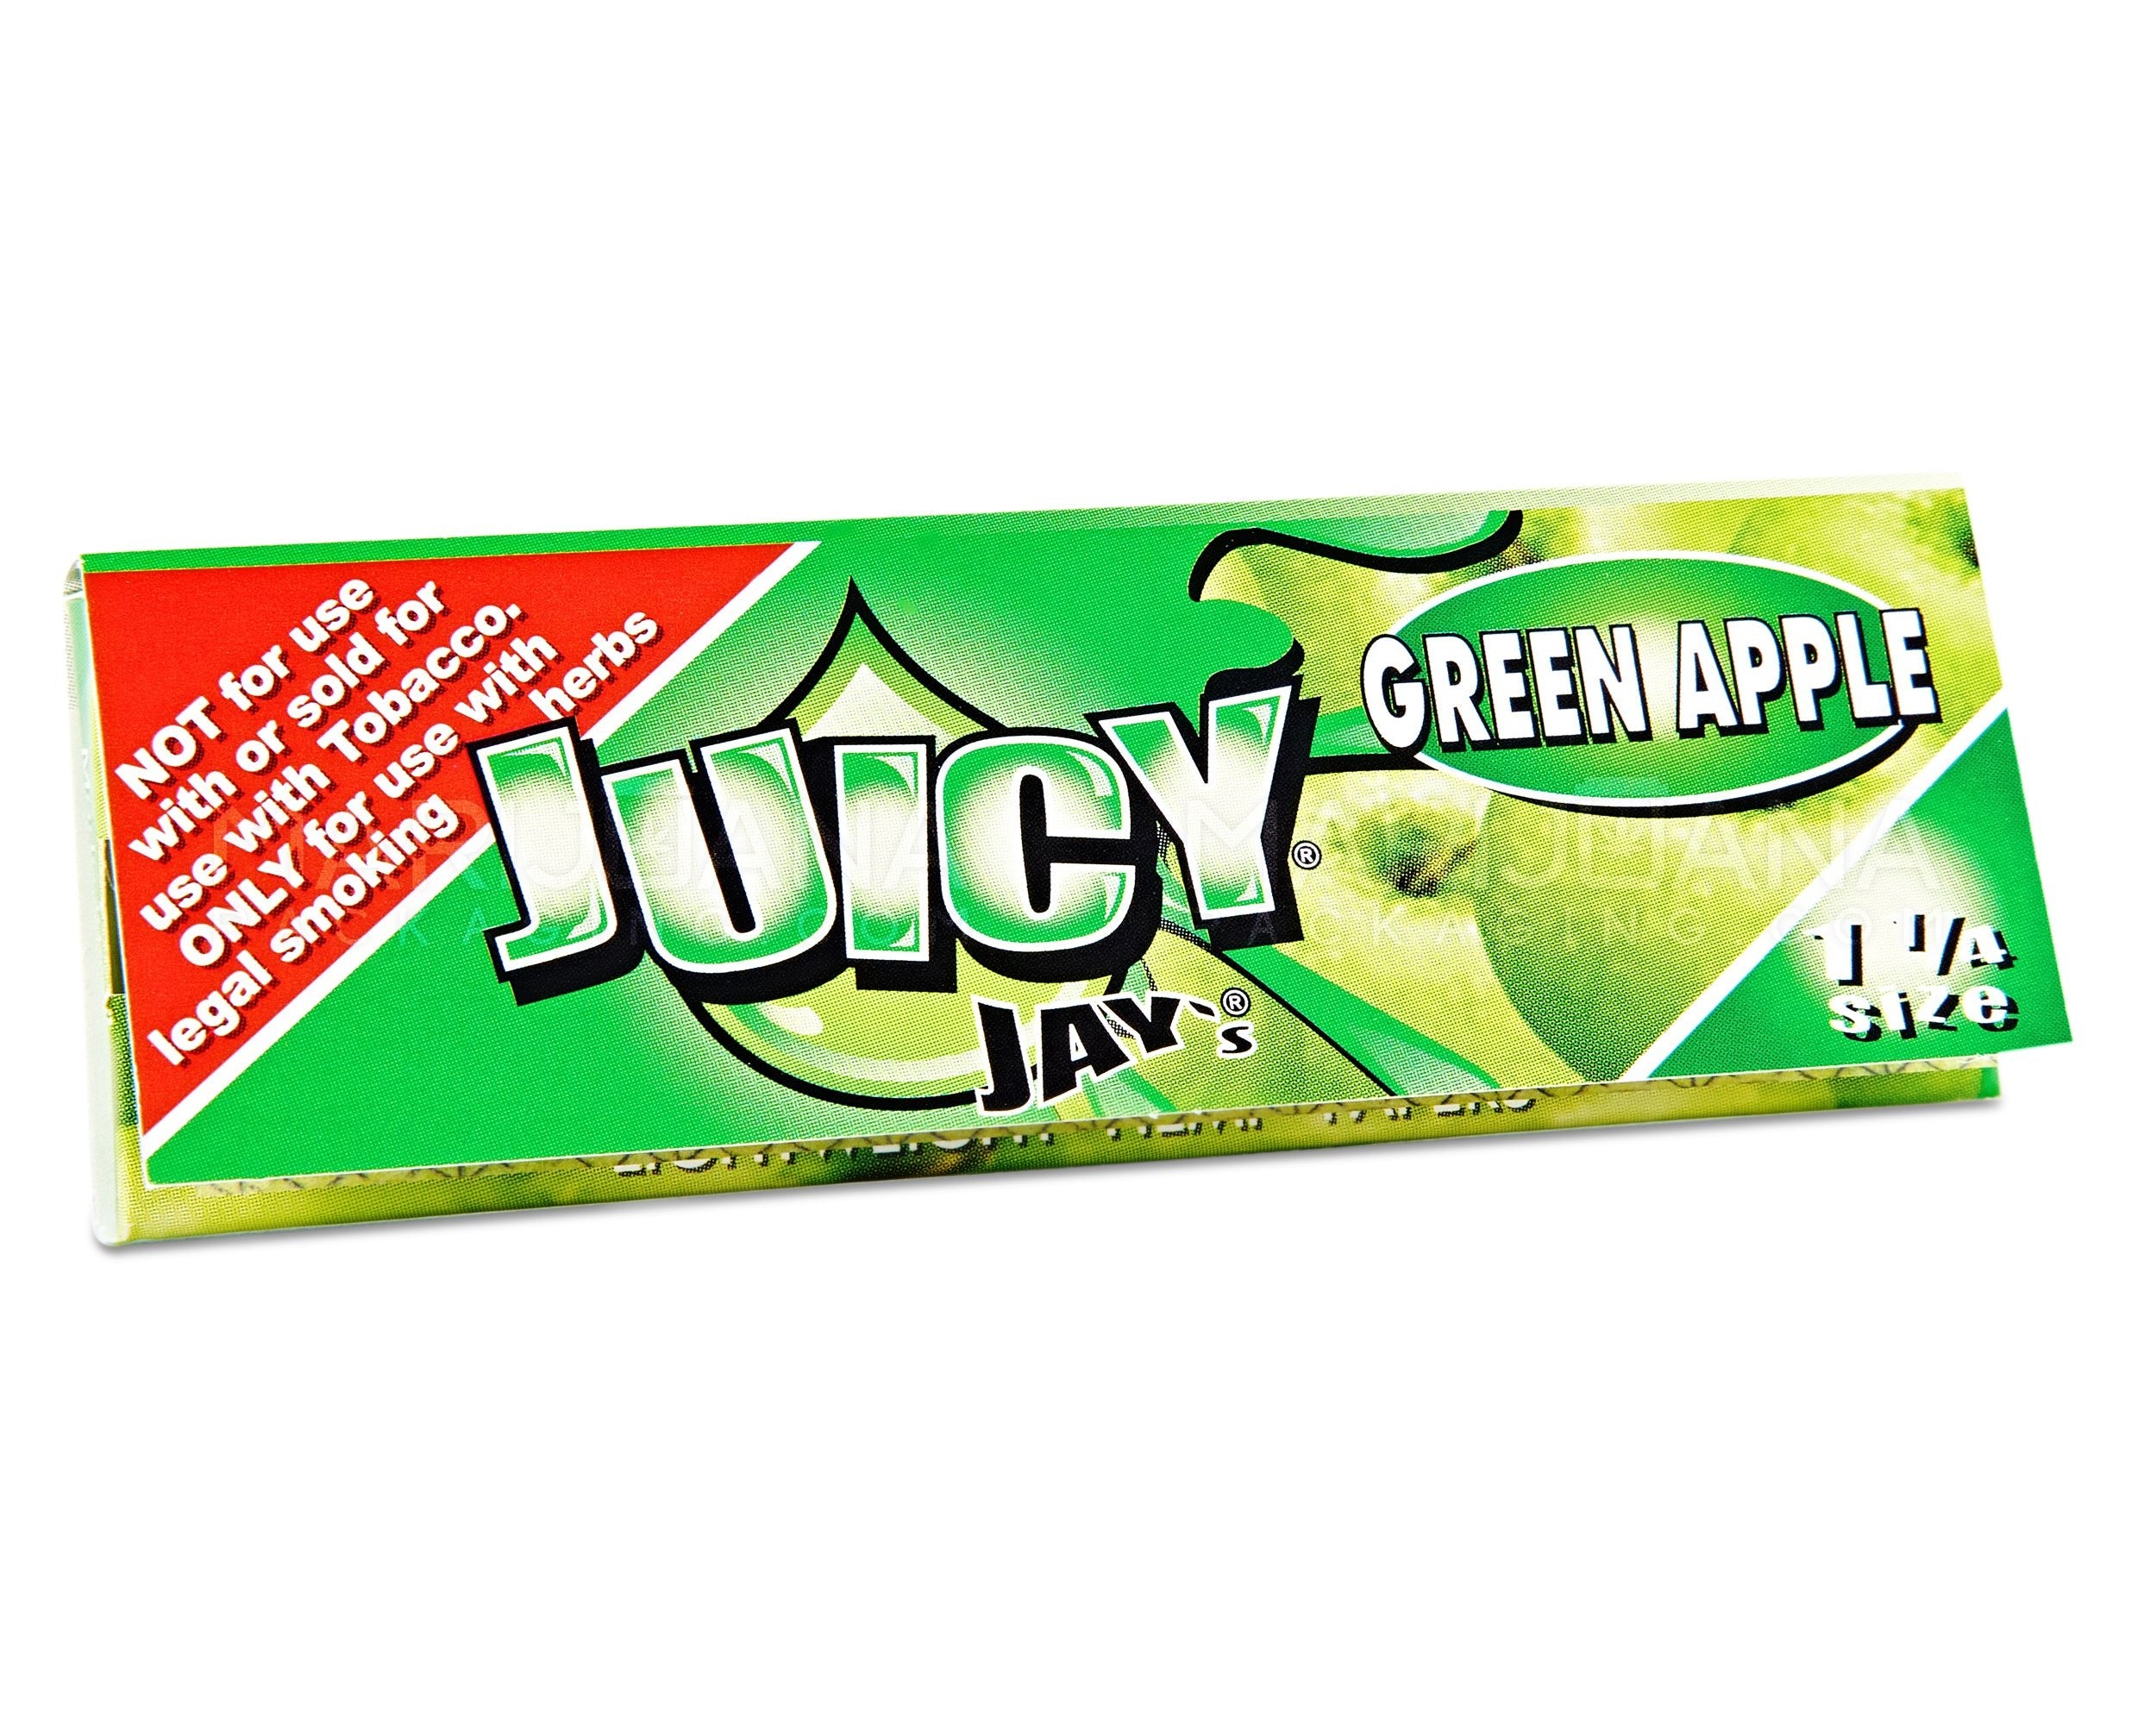 JUICY JAY'S | 'Retail Display' 1 1/4 Size Hemp Rolling Papers | 76mm - Green Apple - 24 Count - 2